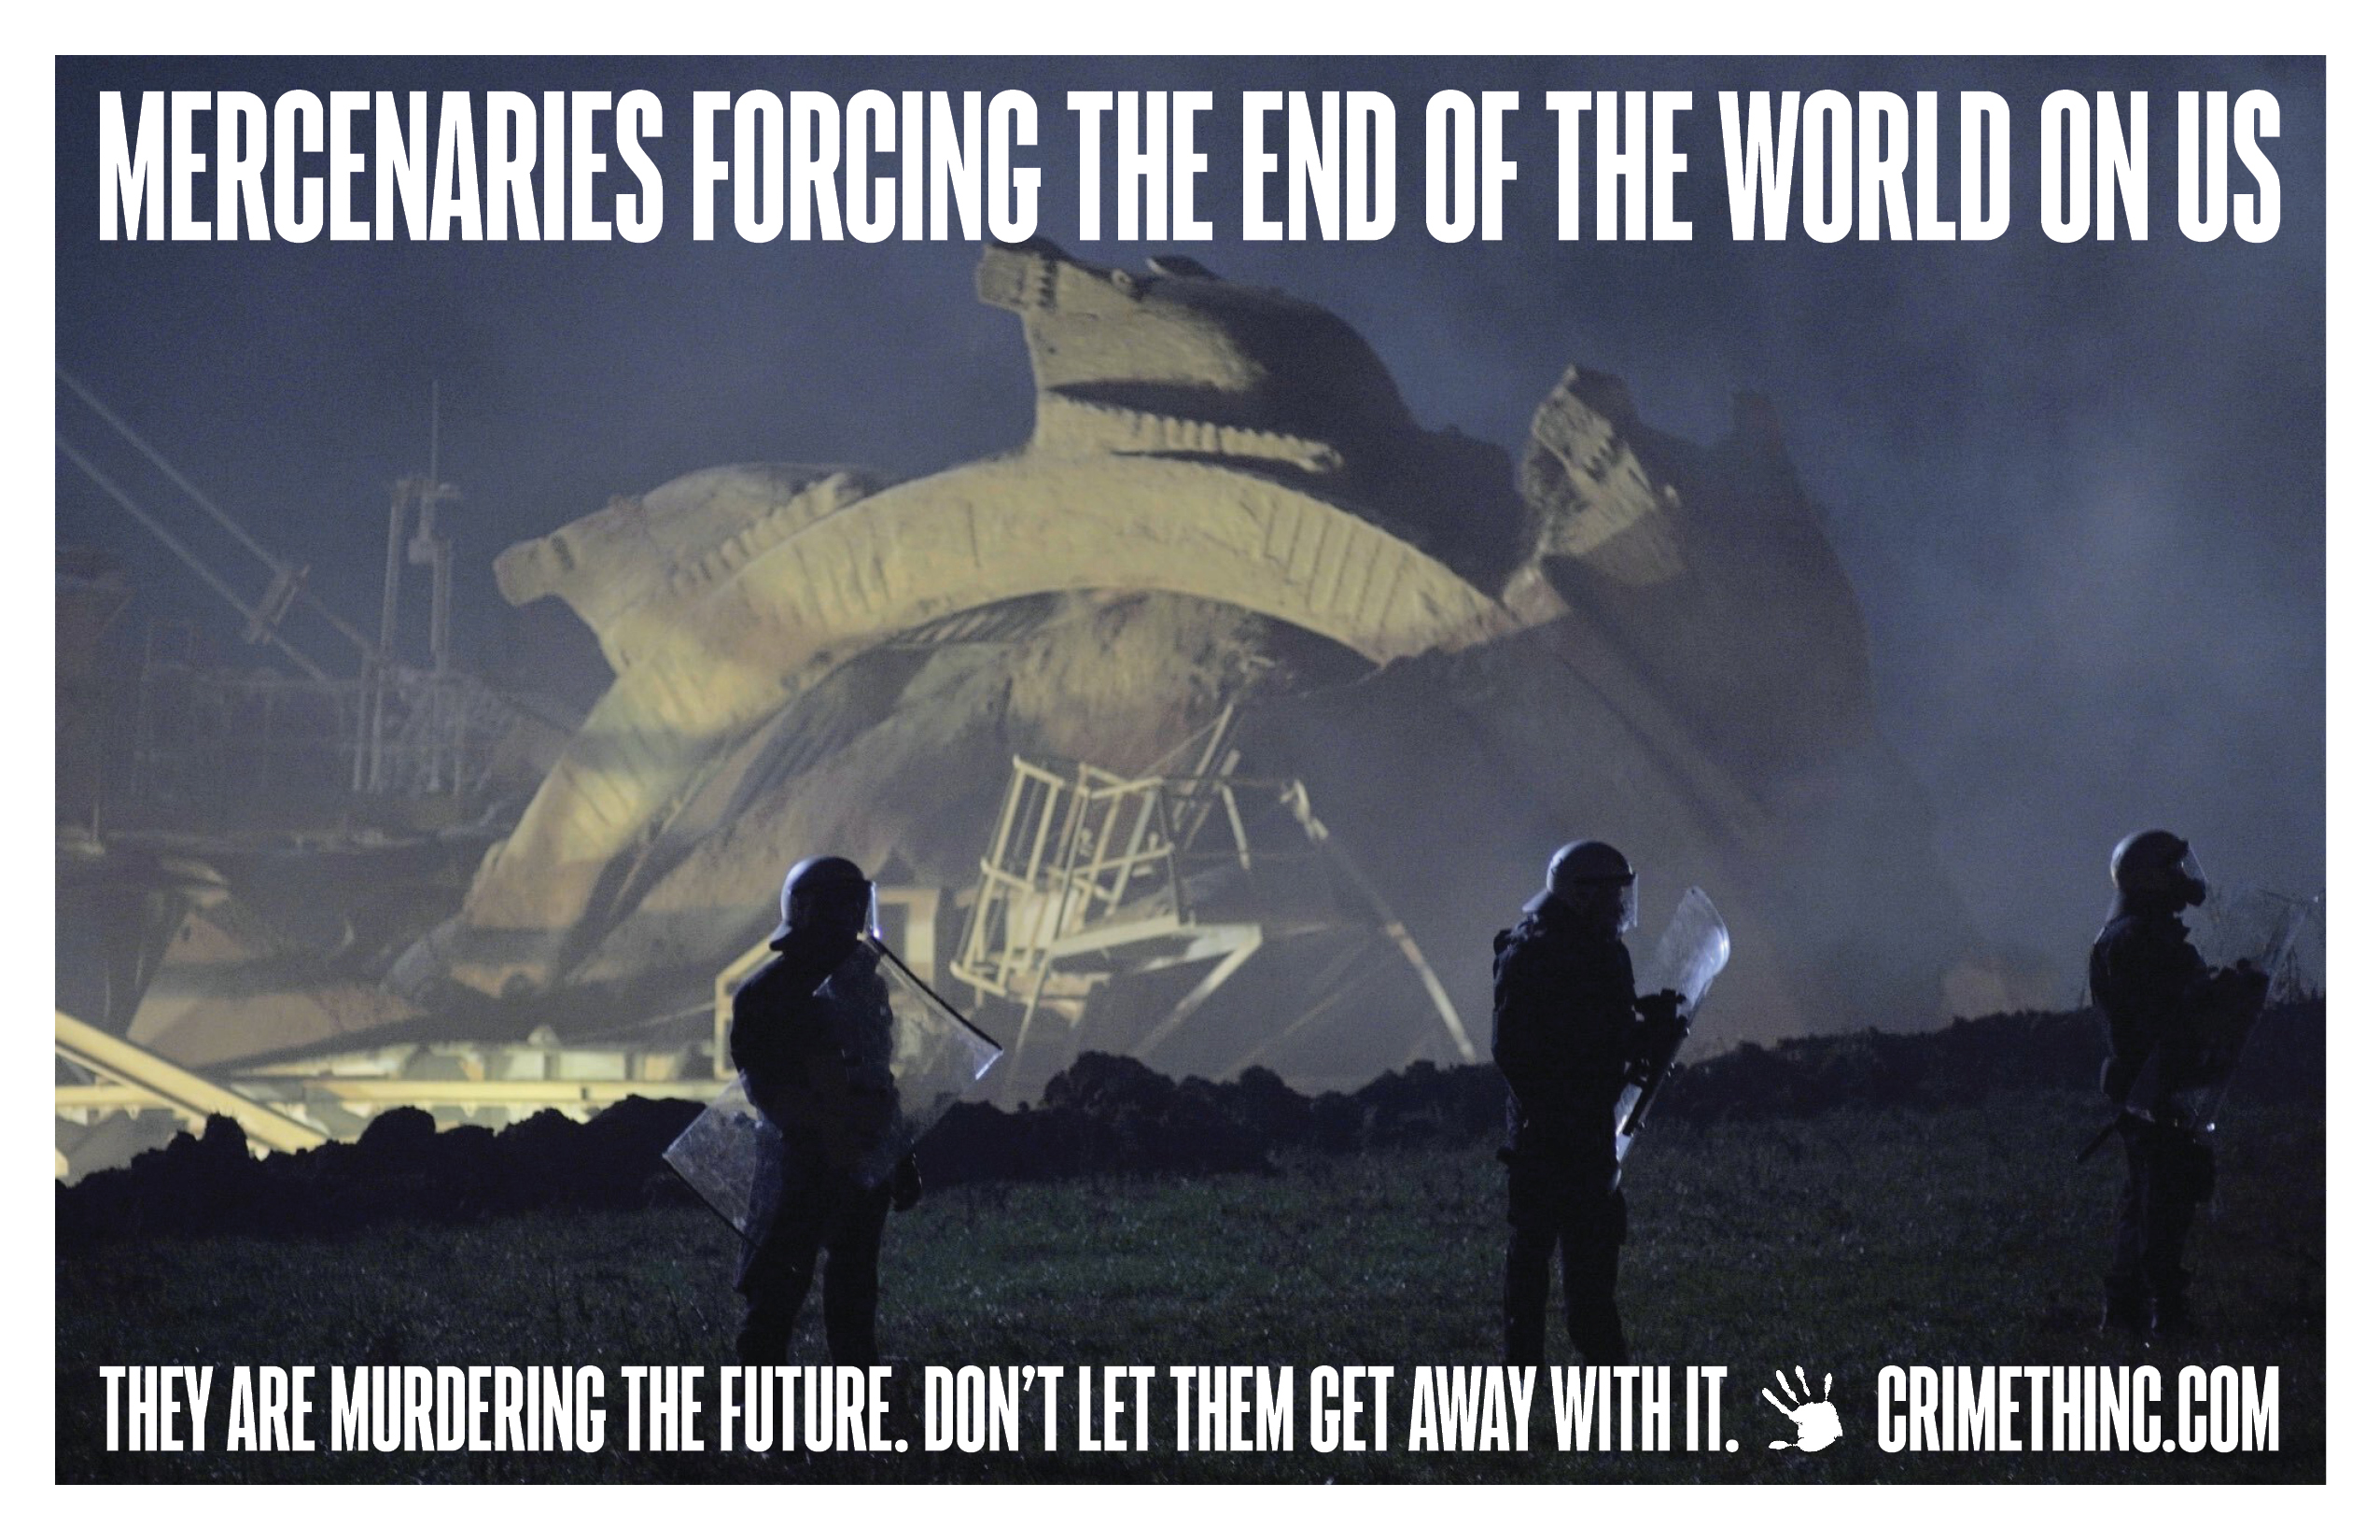 Photo of ‘Mercenaries Forcing the End of the World on Us’ front side